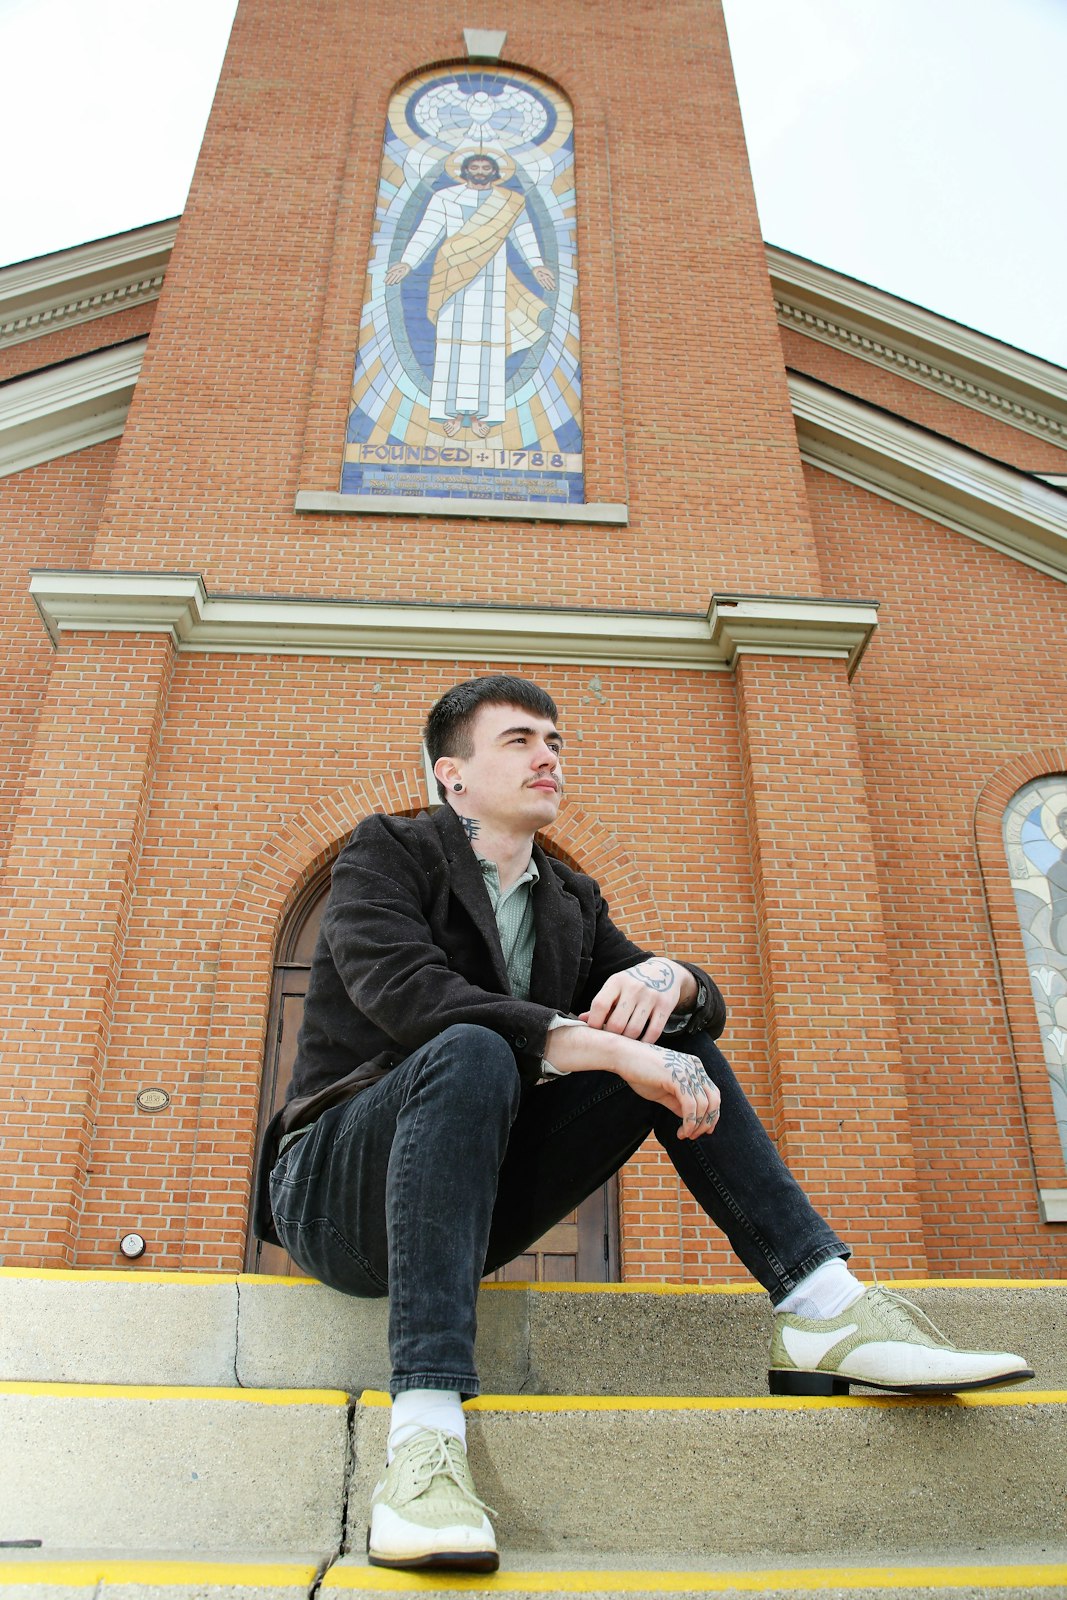 Vecchiarino's childhood and teenage years were filled with trauma, but he's beginning to see his purpose in a new light. “God was telling me finally this is where I belonged," he said of his anticipated initiation into the Catholic Church. "This is my home.”